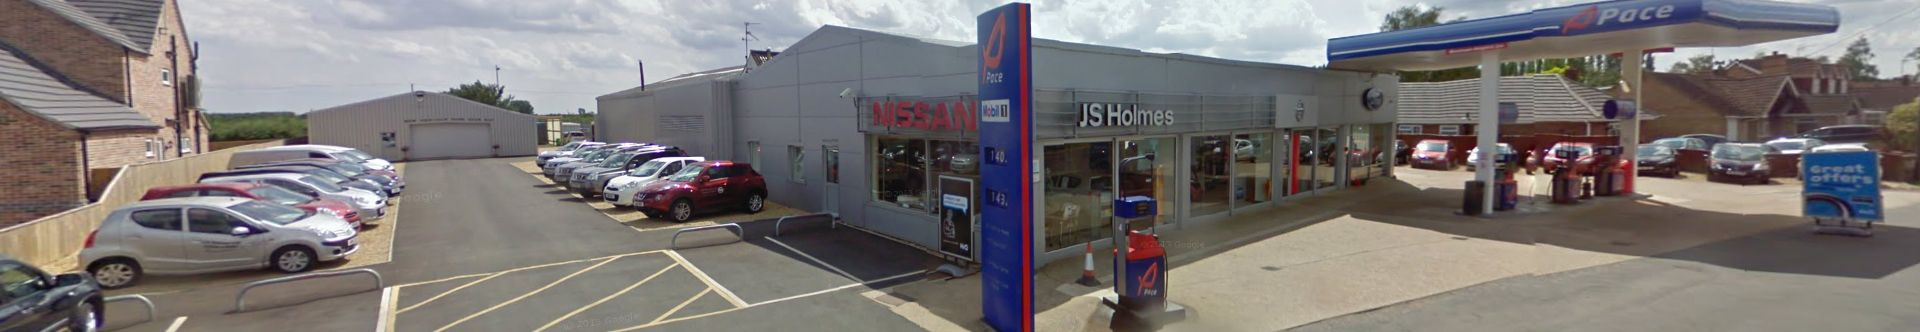 NISSAN MOTABILITY SPECIALISTS AT JS HOLMES